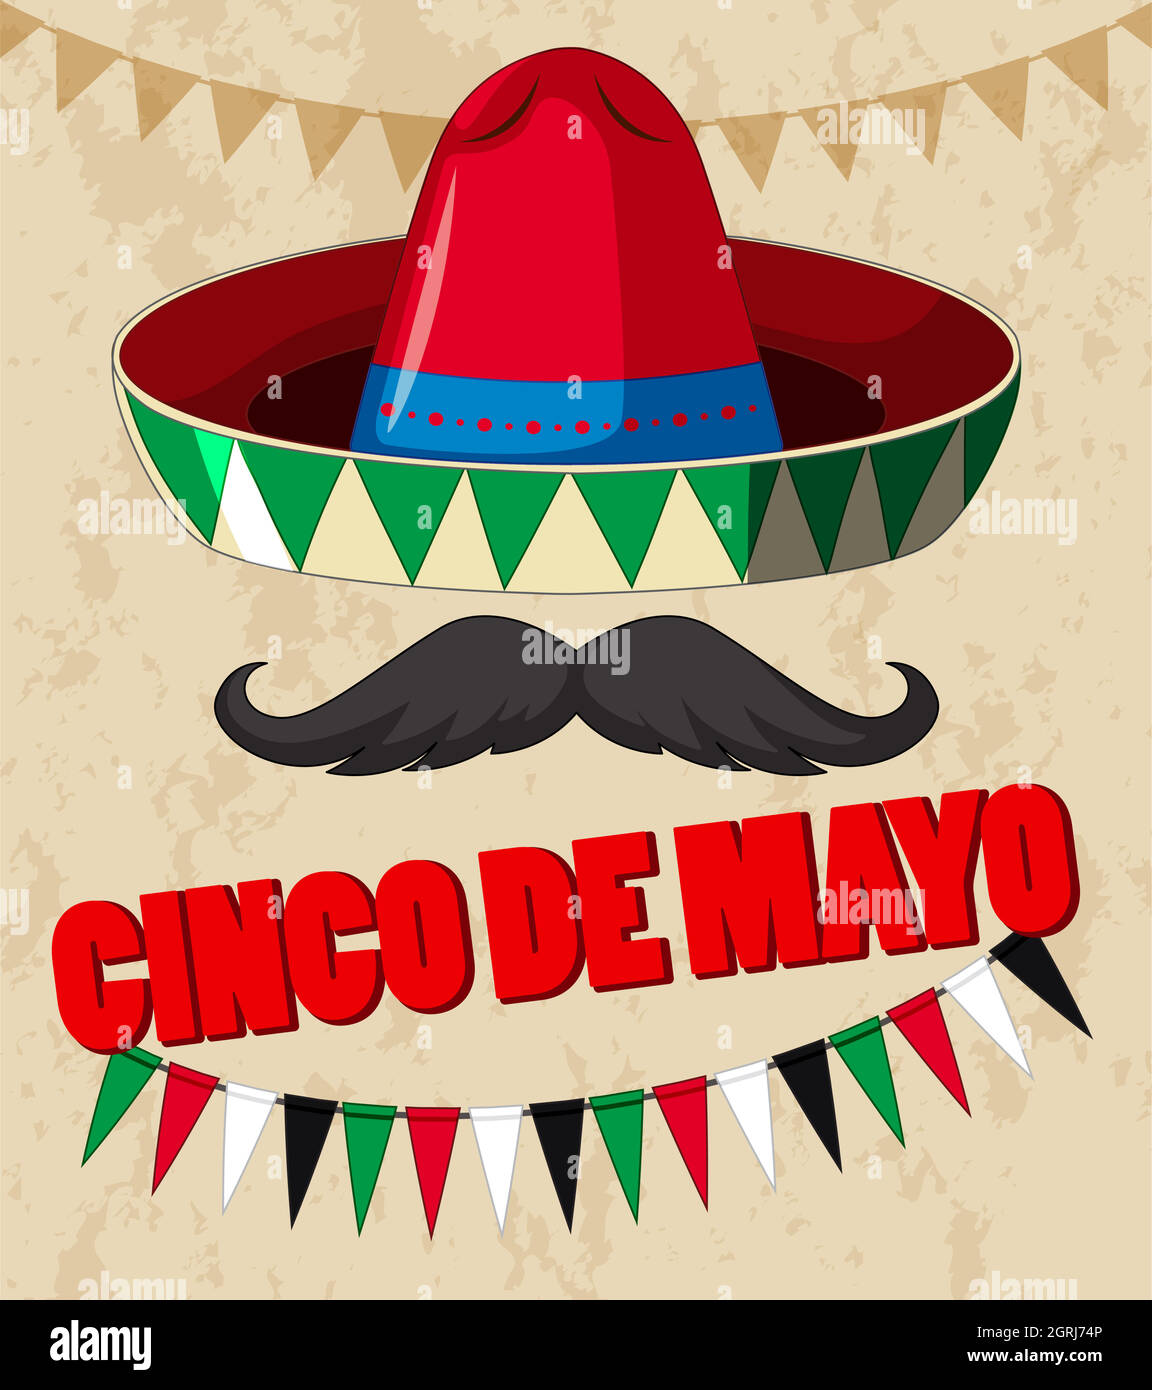 Cinco de mayo poster design with mexican hat Stock Vector